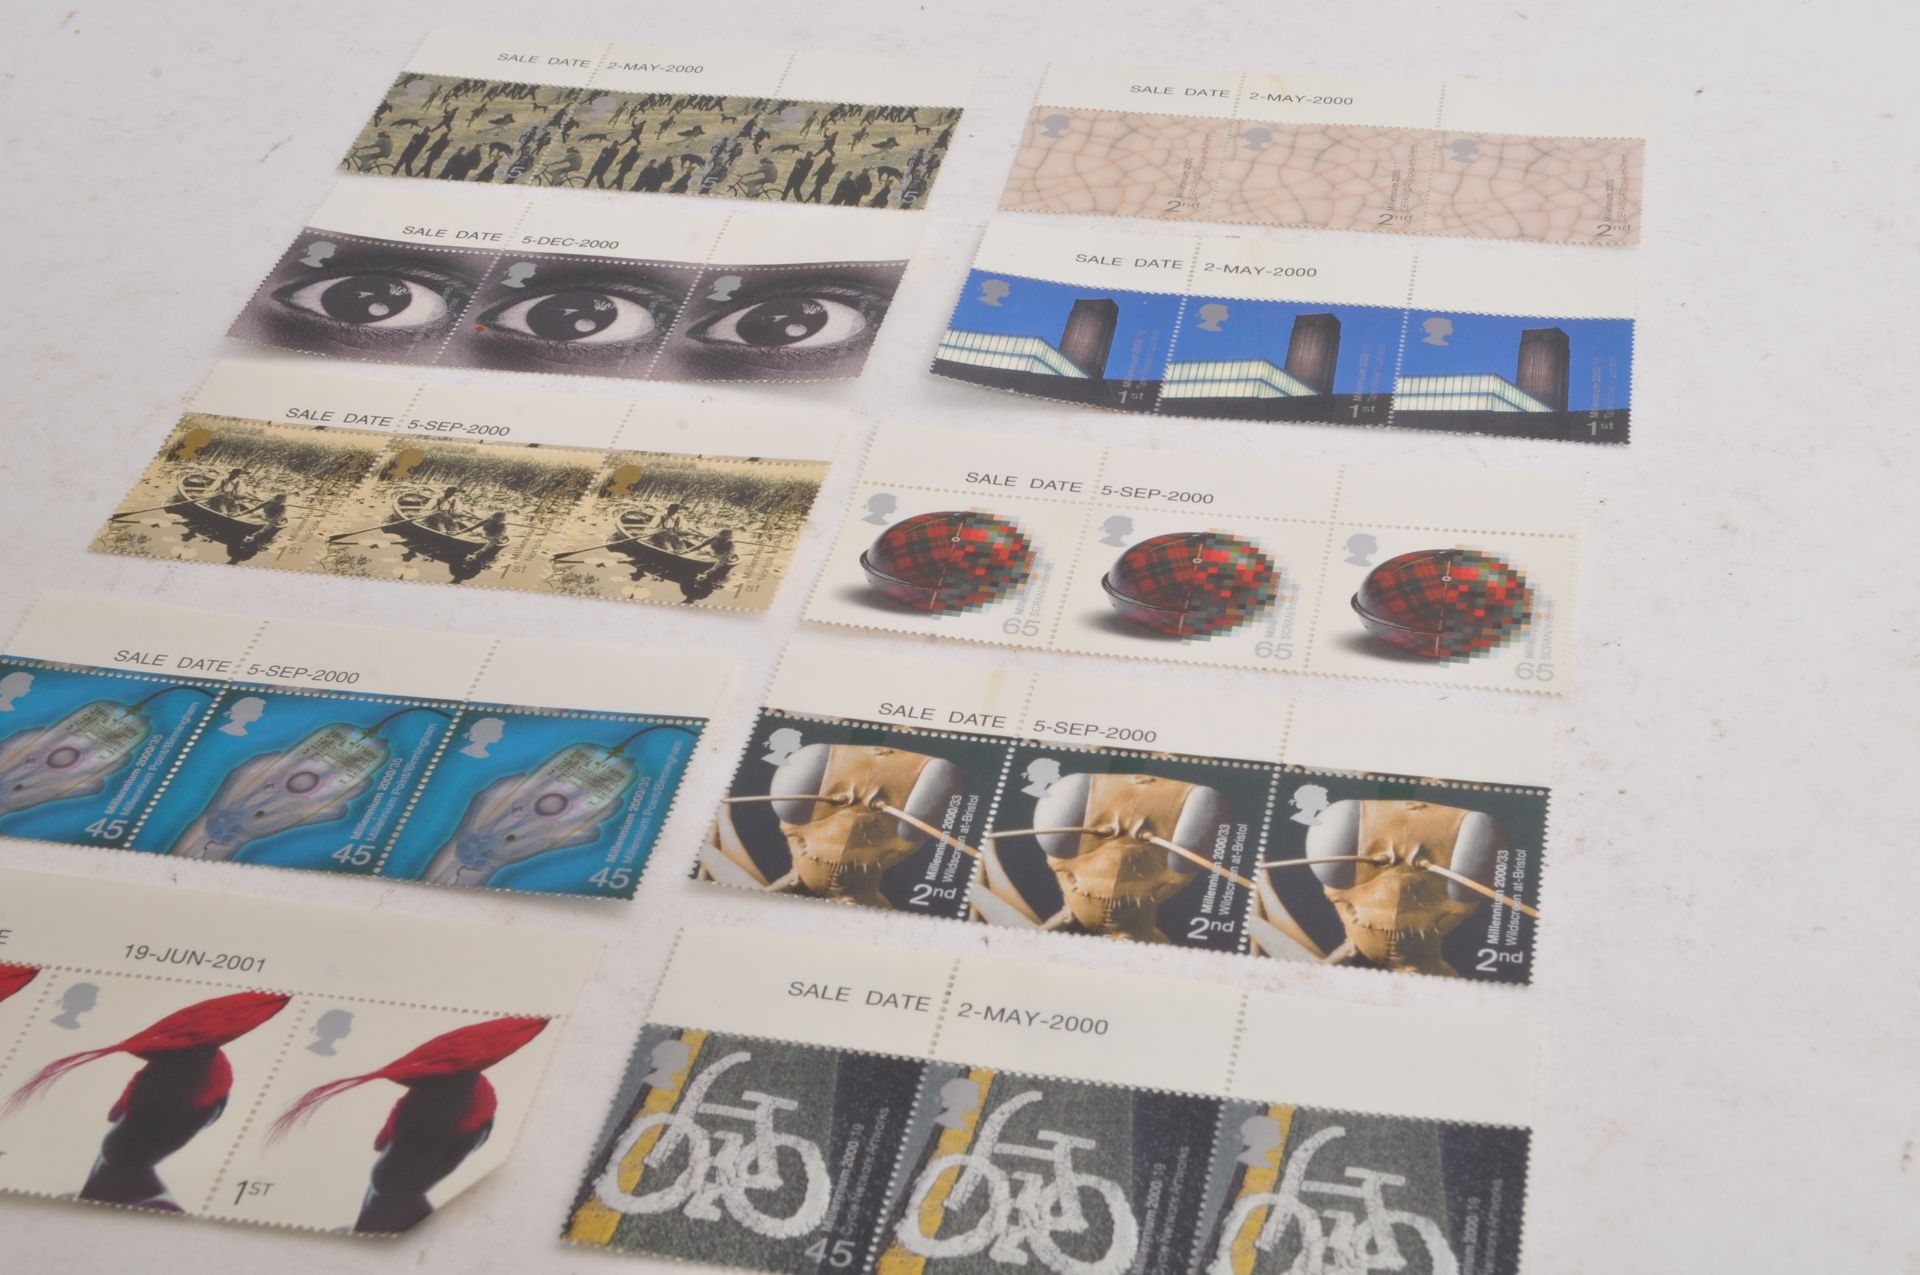 LARGE COLLECTION UK 1ST CLASS PRESENTATION PACKS STAMPS - Image 6 of 6